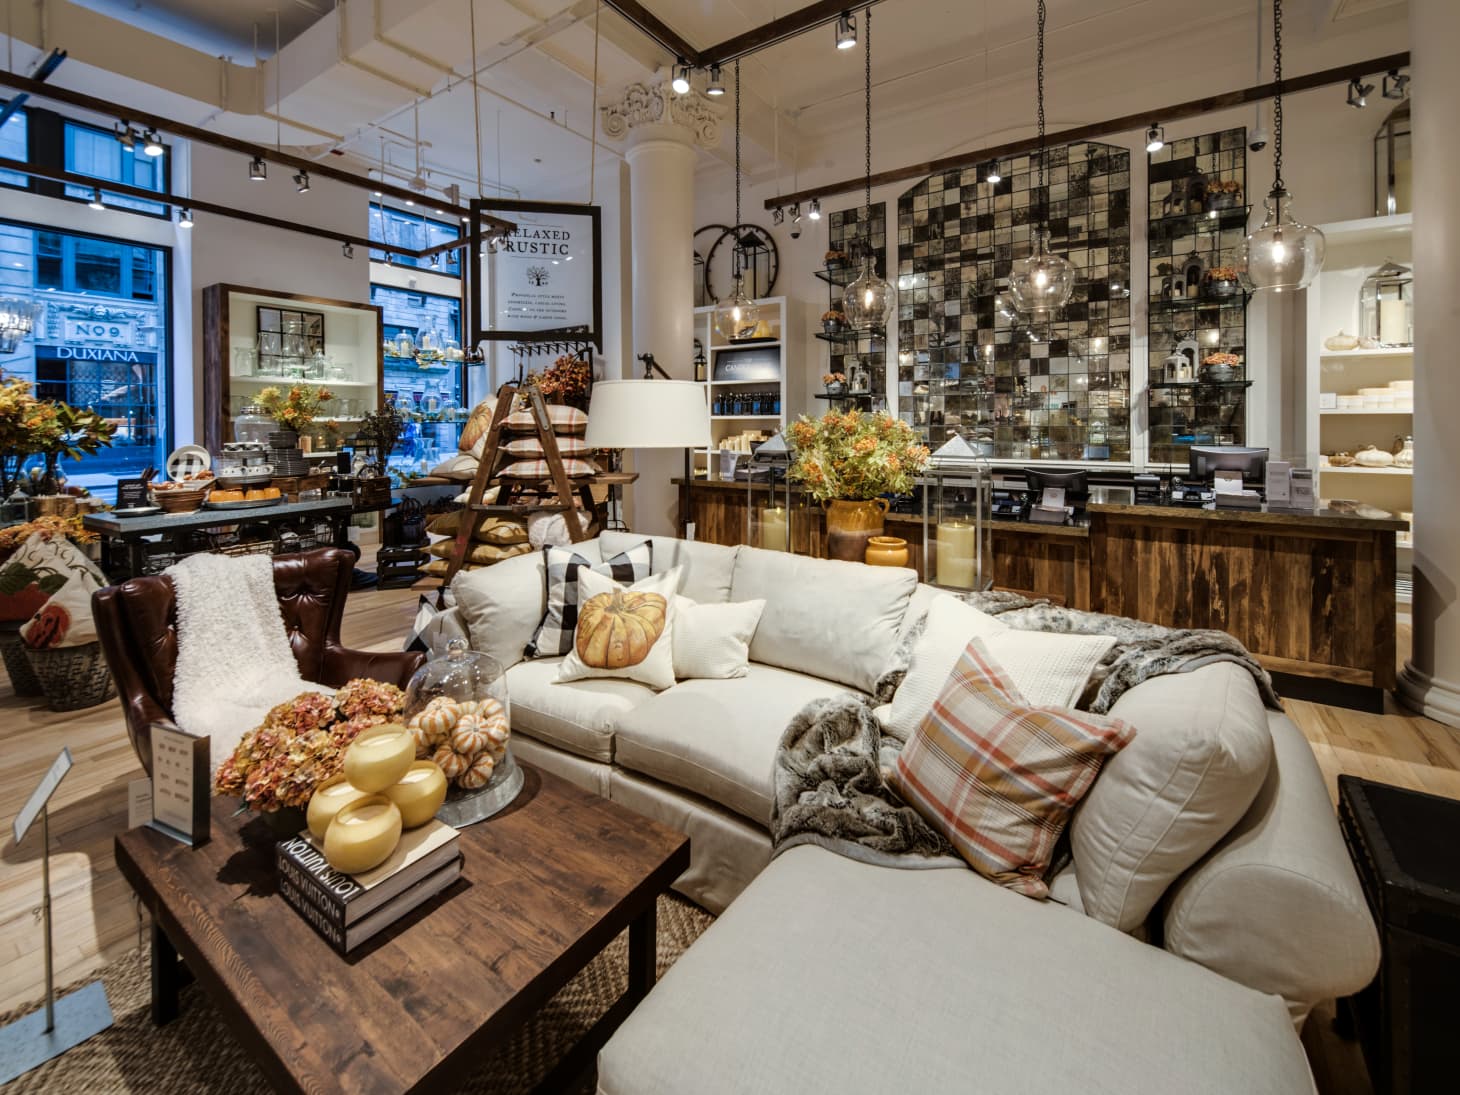 Pottery Barn’s New NYC Flagship Focuses on Small Spaces, Easy